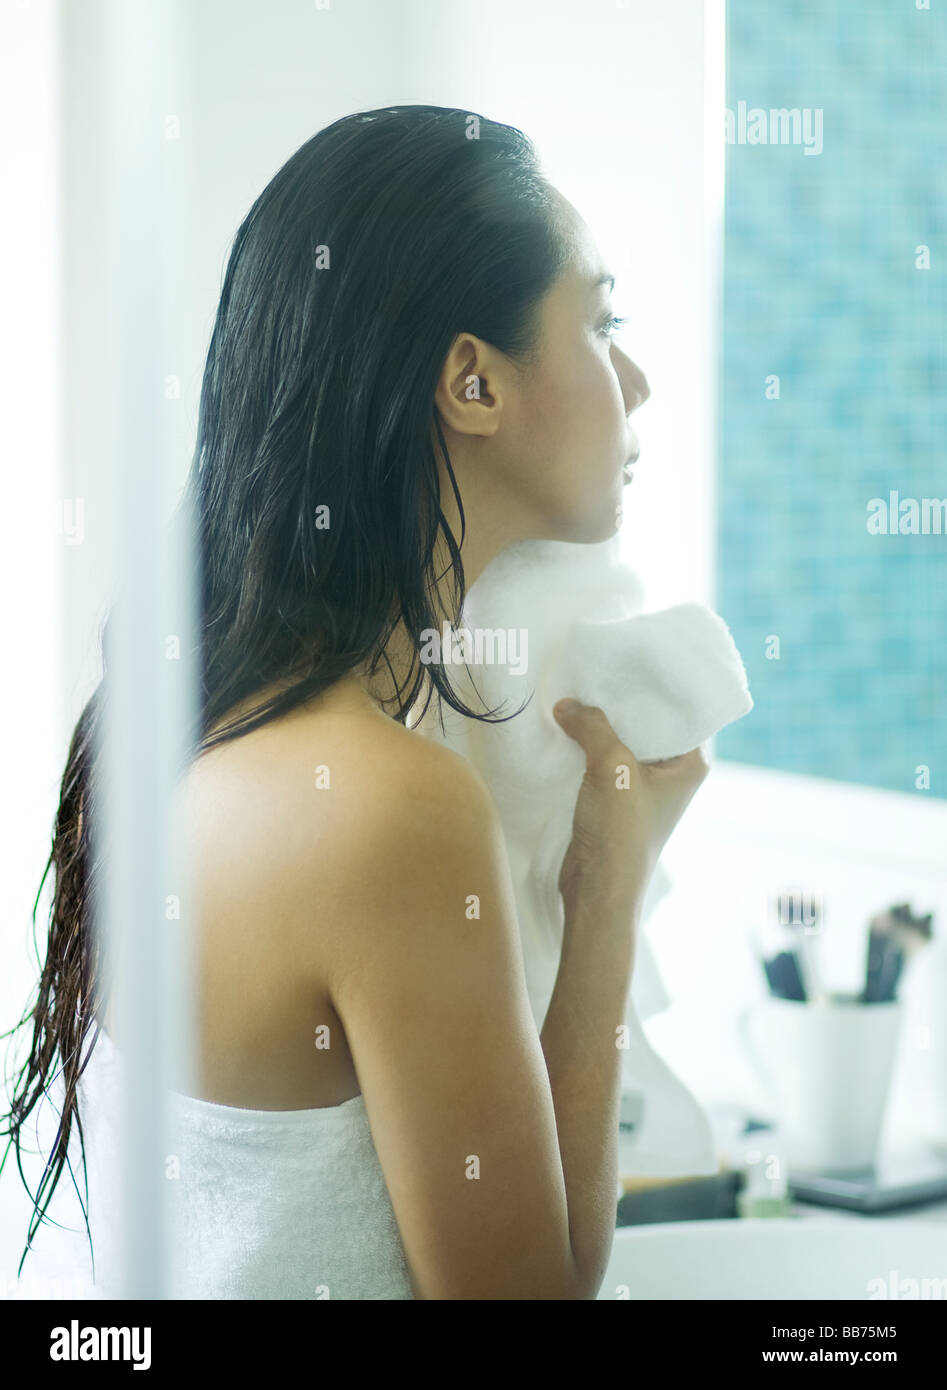 Woman wiping face with towel in bathroom Stock Photo